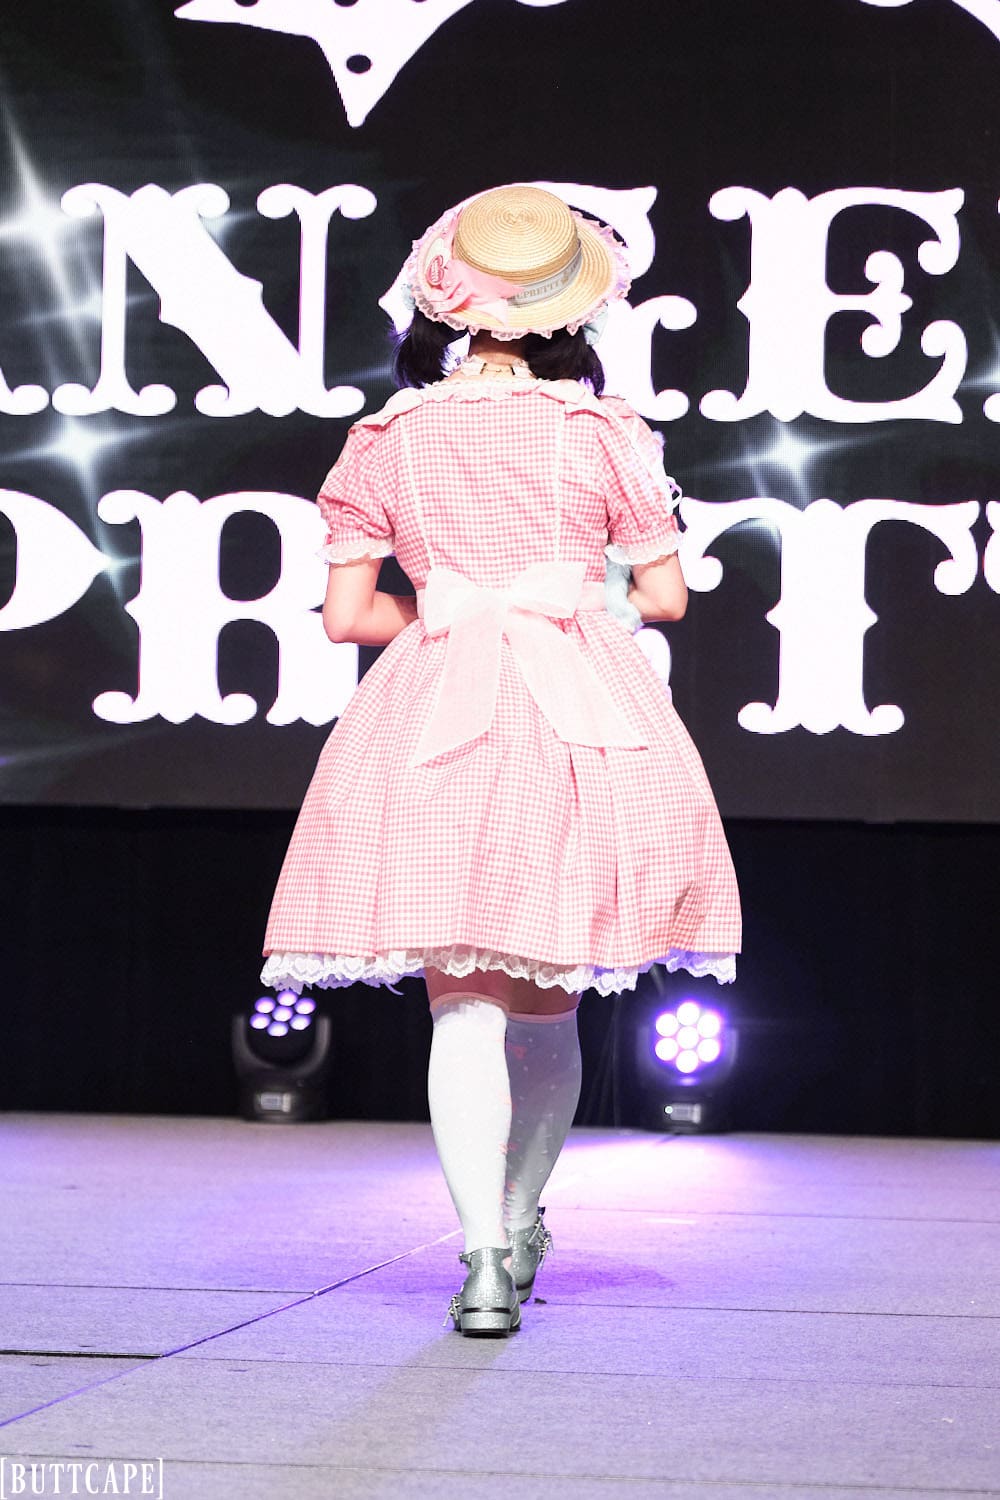 Model 11 wearing pink and white gingham lolita dress and boater hat holding two stuffed animals - back side.